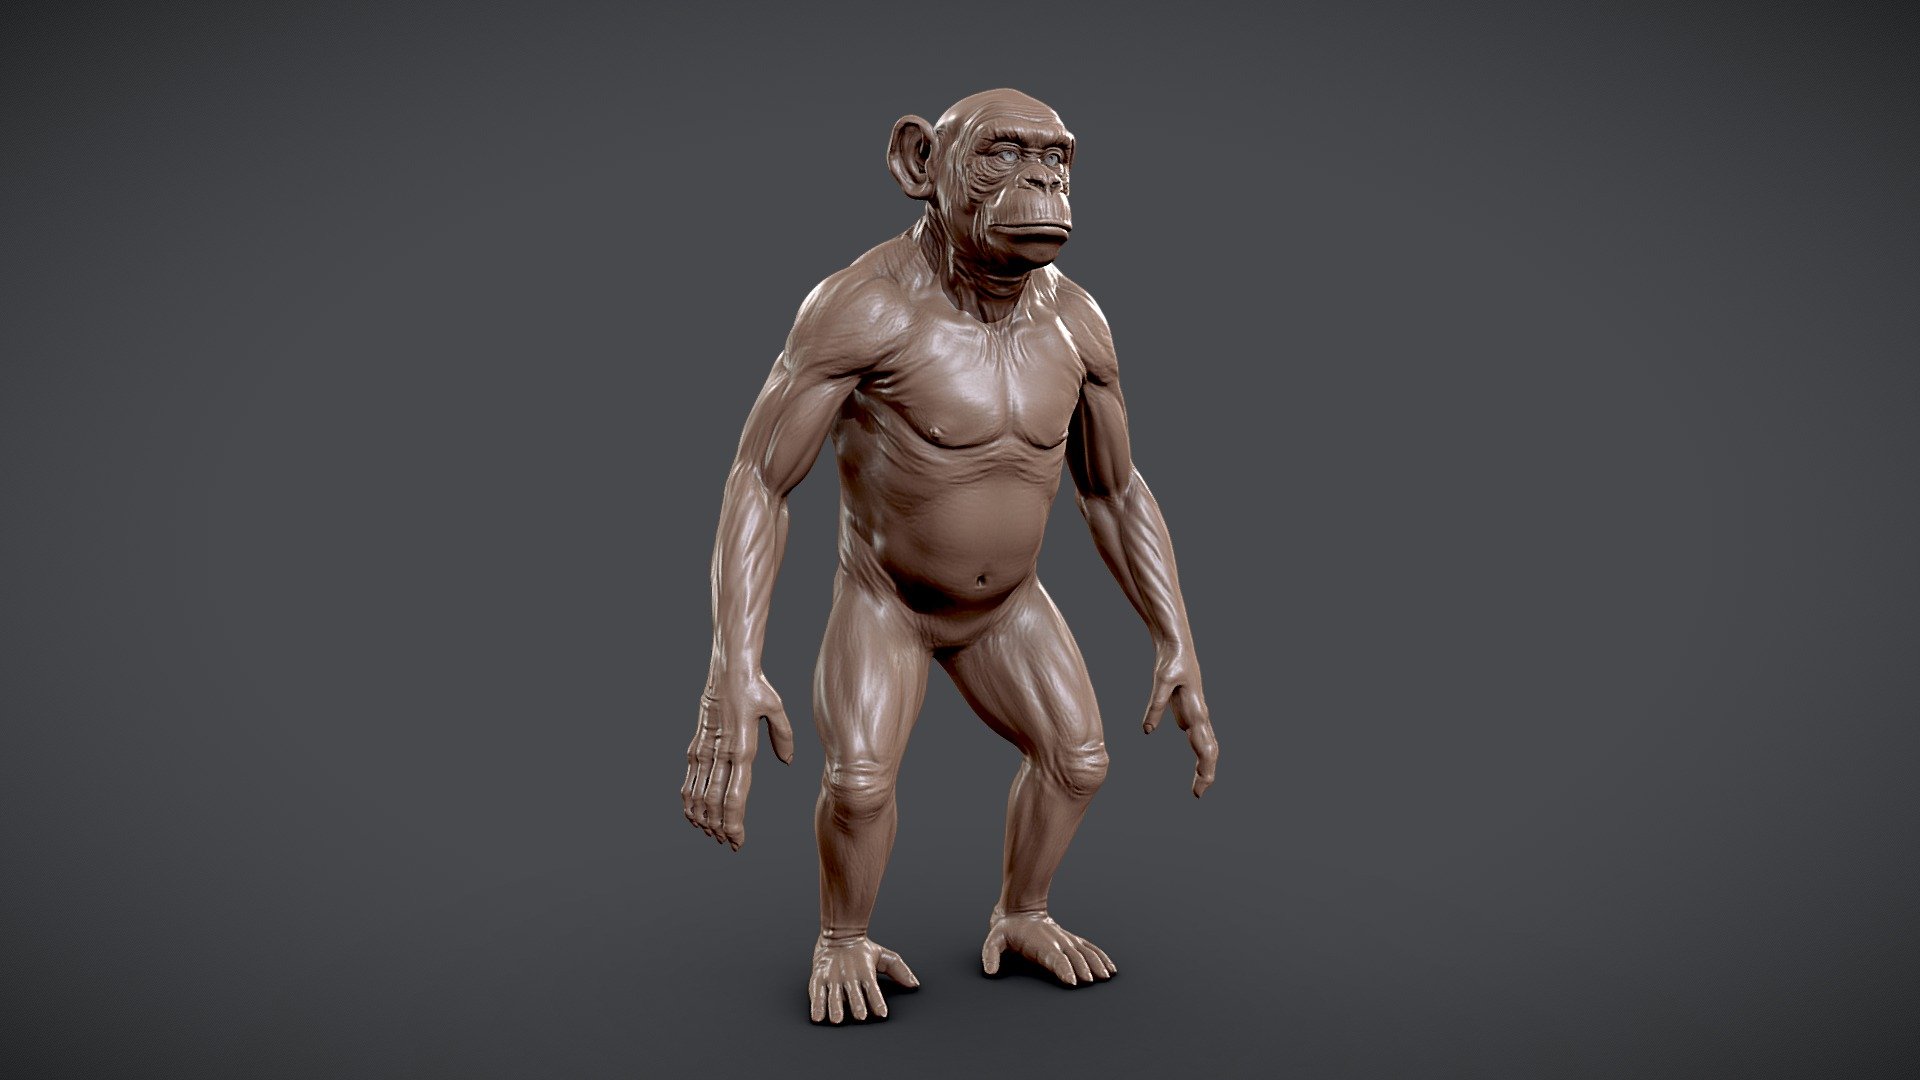 Click the link to get the model:


https://www.artstation.com/a/28482134
Chimpanzee model was made in Zbrush and retopo and UV Unwrap in  Maya with proper topology and looping with Unwraped UV and no over lapping.

Ready for sculpting and texturing&hellip;

File format:





Obj




Fbx ( low, High )




Maya file ( low, Map) 




Blender file ( Map, Sculpt)




Zbrush file 




Displacement



Inside the product:





clean topology




Single Udim 




unwrapped Uvs for texturing




no overlapping UVs




proper naming and grouping




no unwanted shaders and history.



You may also like:


👉 https://skfb.ly/oSAX8 👈



👉 https://skfb.ly/oQ9oN 👈
 - Chimpanzee Sculpt - Buy Royalty Free 3D model by Tashi59 (@tsering) 3d model